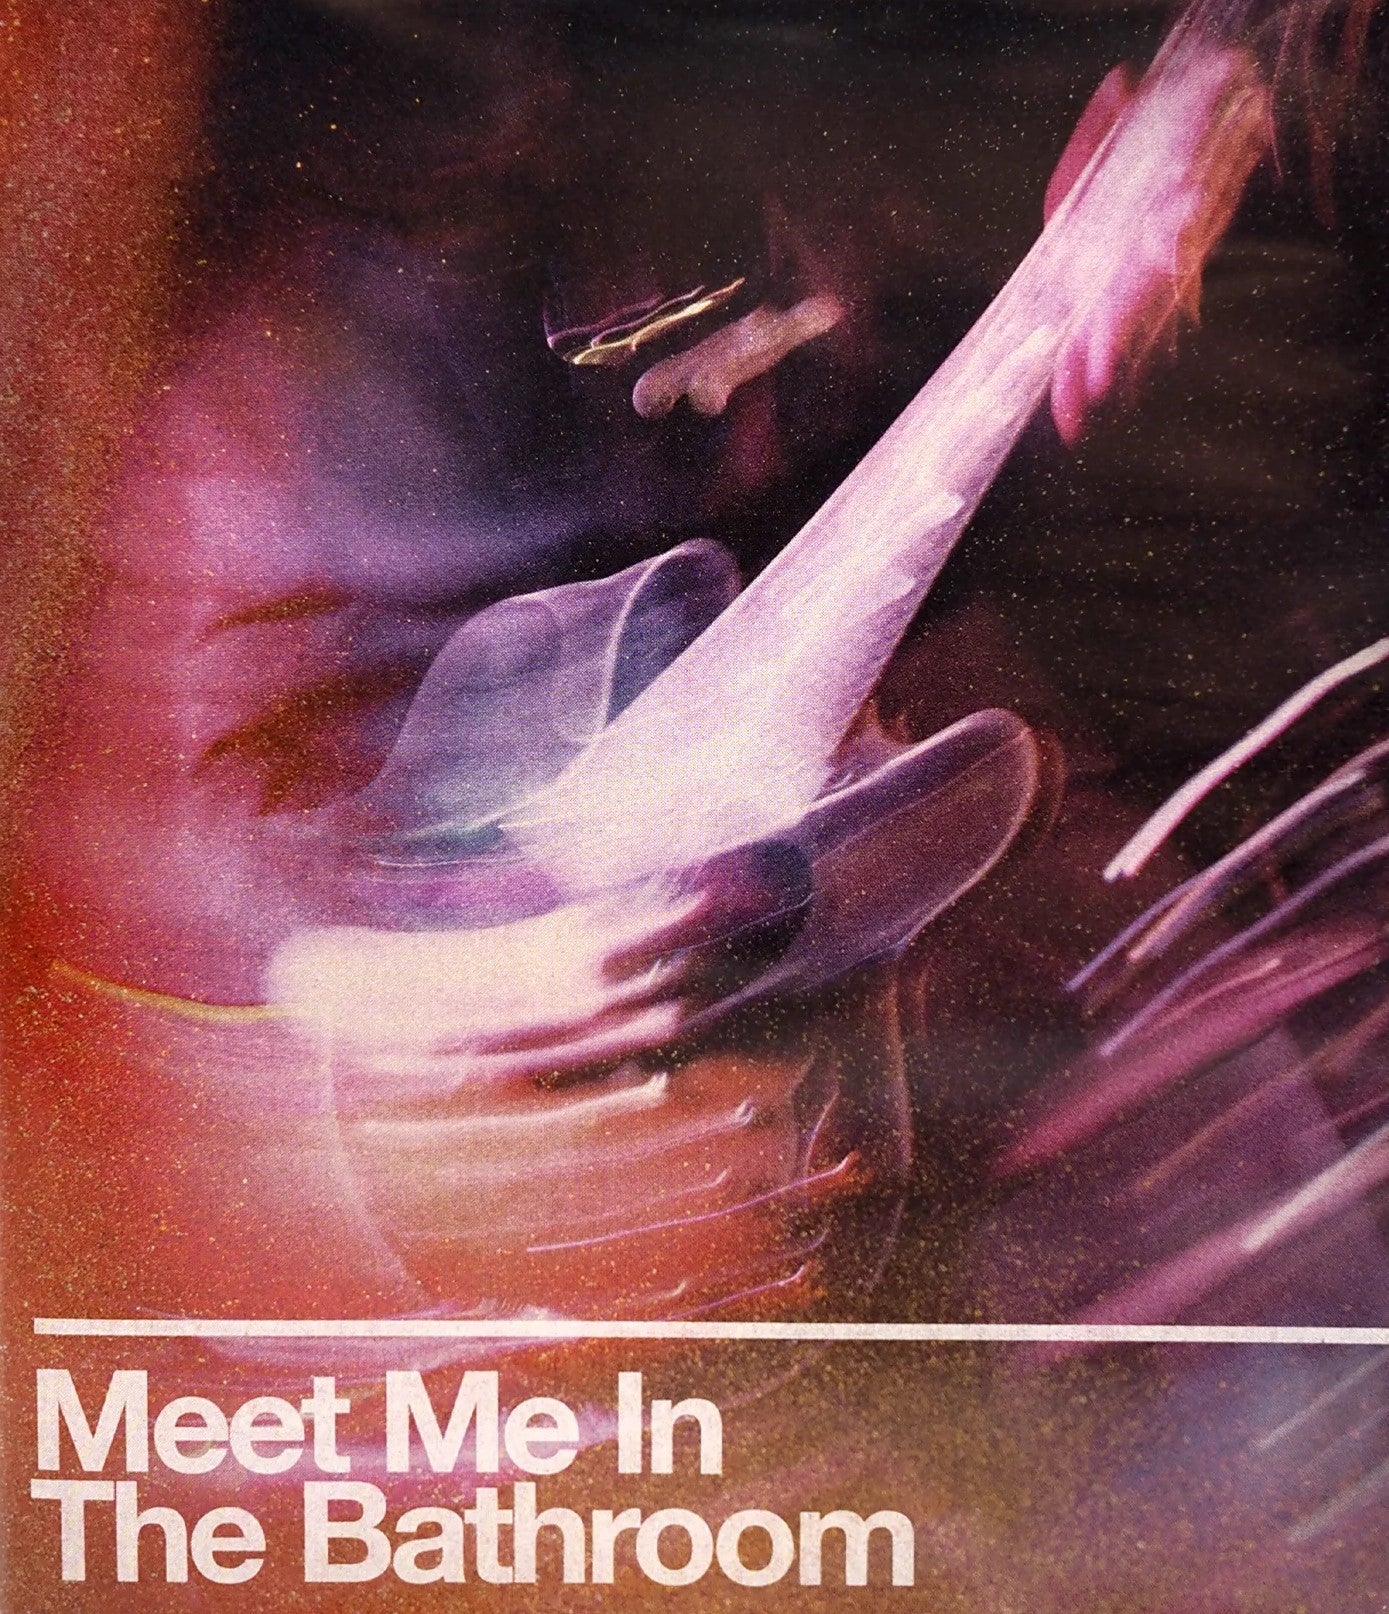 MEET ME IN THE BATHROOM (LIMITED EDITION) BLU-RAY